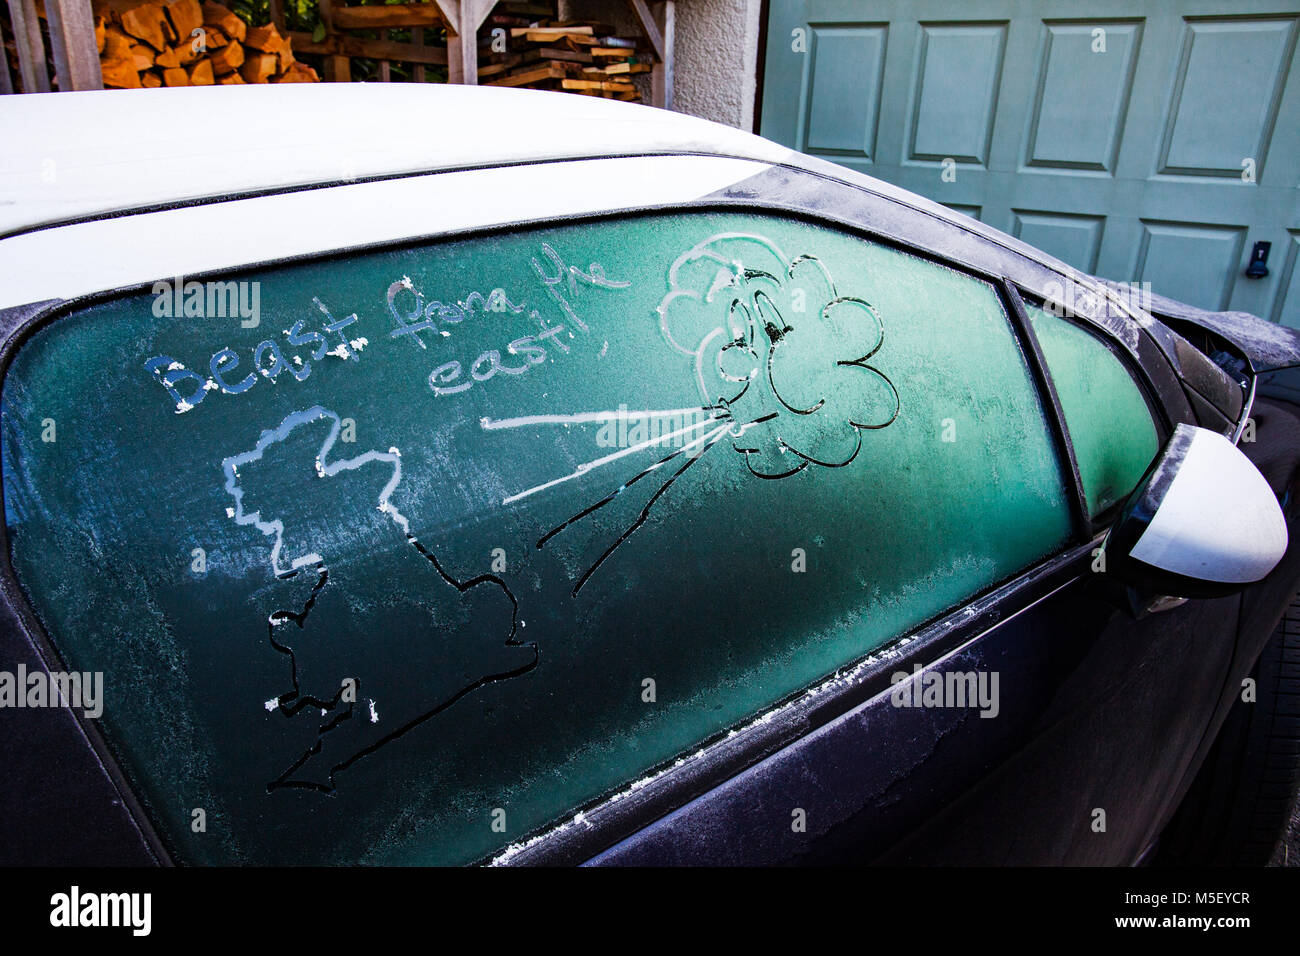 Car window with a drawn face cloud blowing air towards a map of the united kingdom or UK, Flintshire, Wales, UK Stock Photo